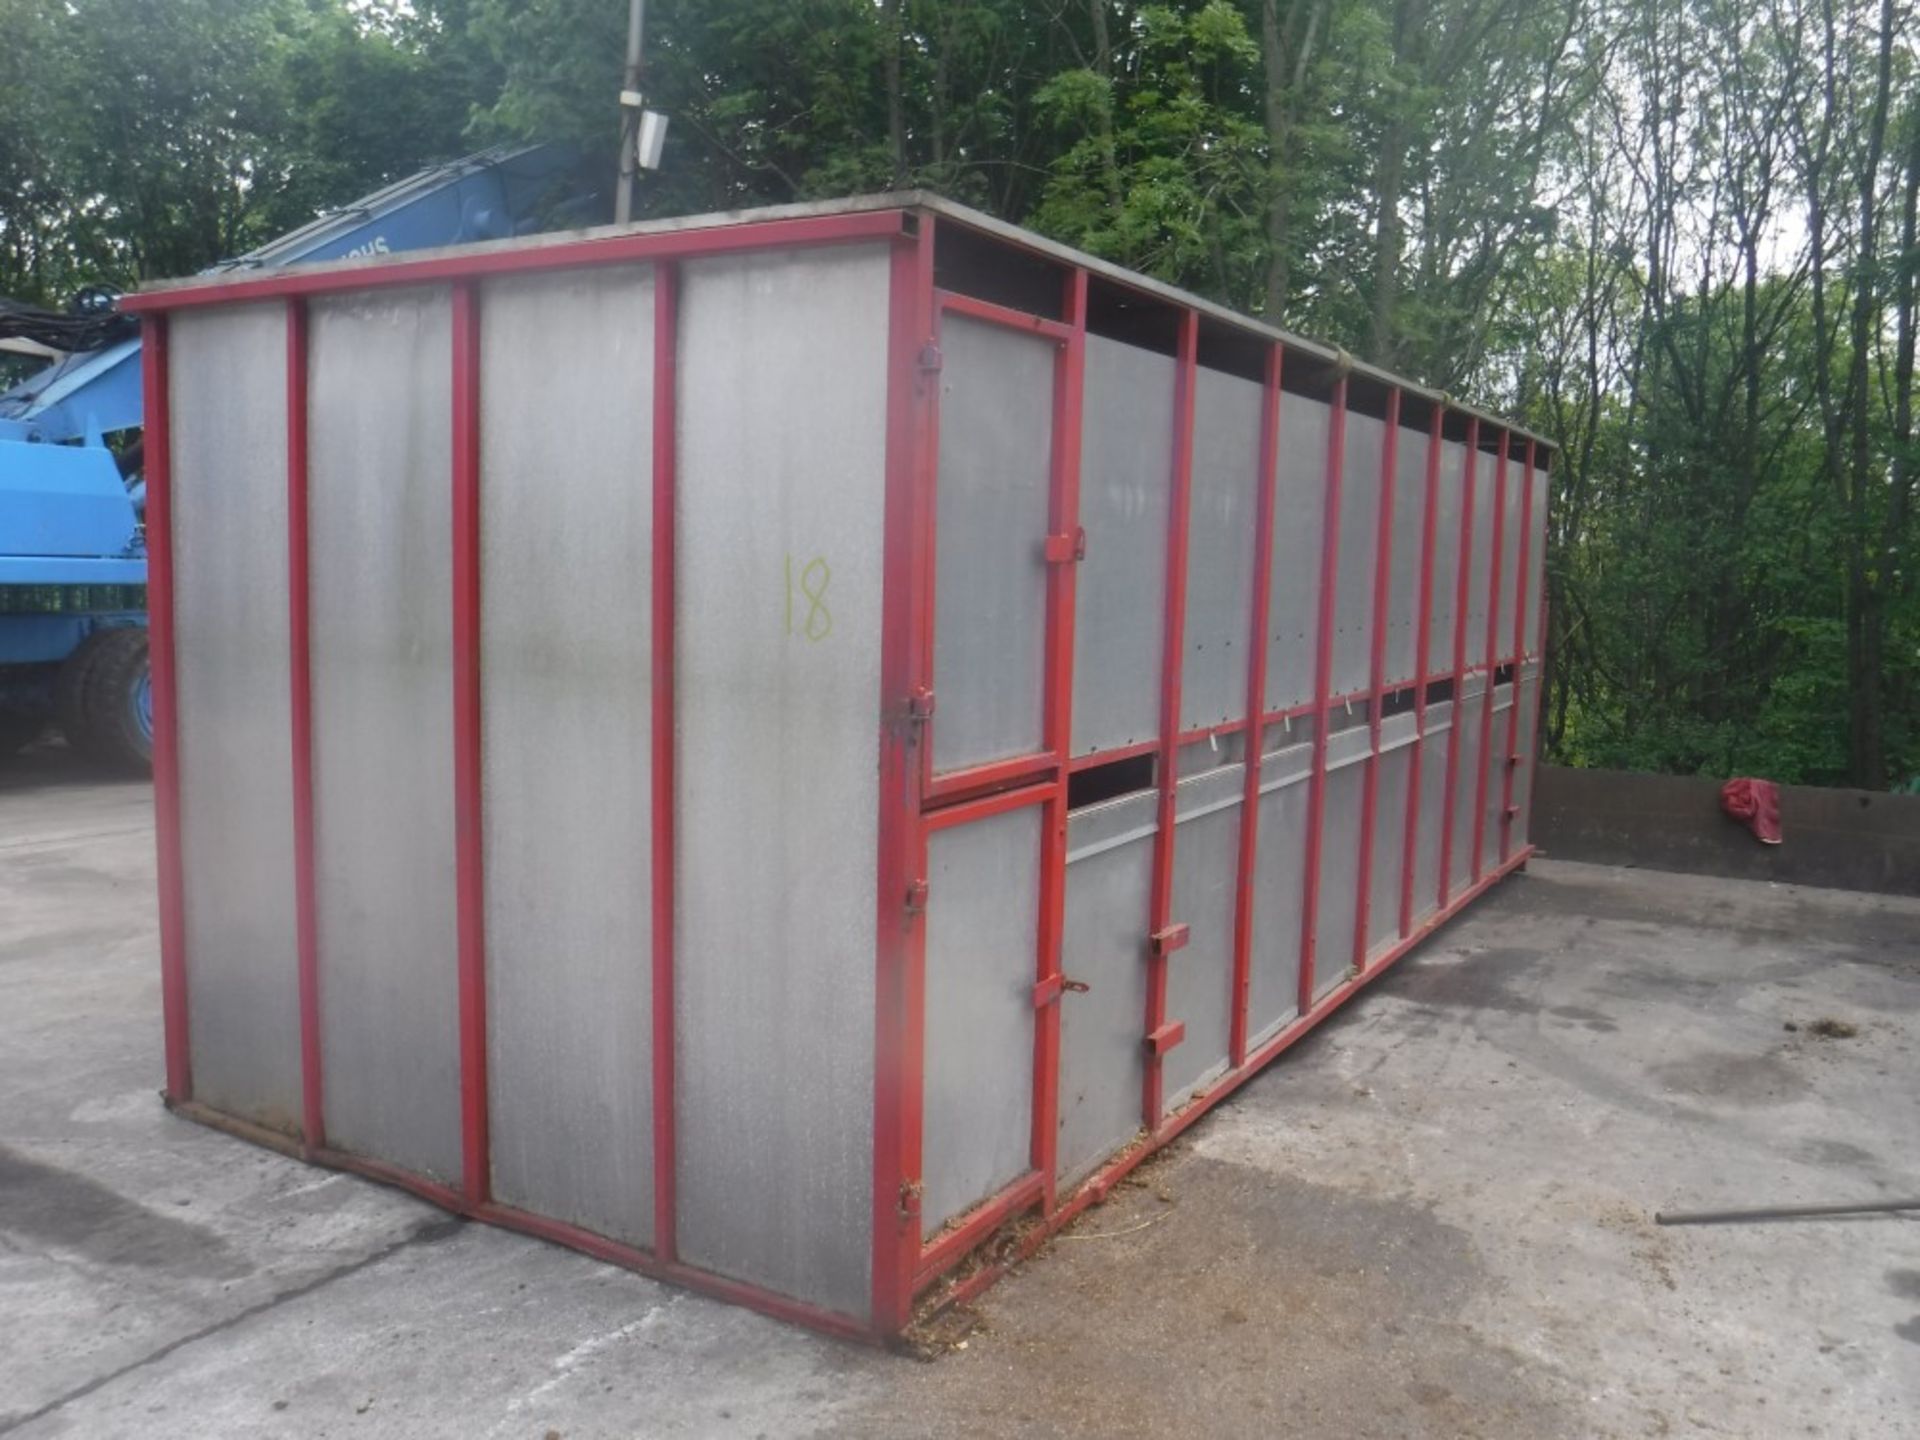 ALLEY HORSE BOX CONTAINER, CHEQUERED PLATE FLOOR, 20' X 7'5" X 6'8", VERY GOOD CONDITION [+ VAT]